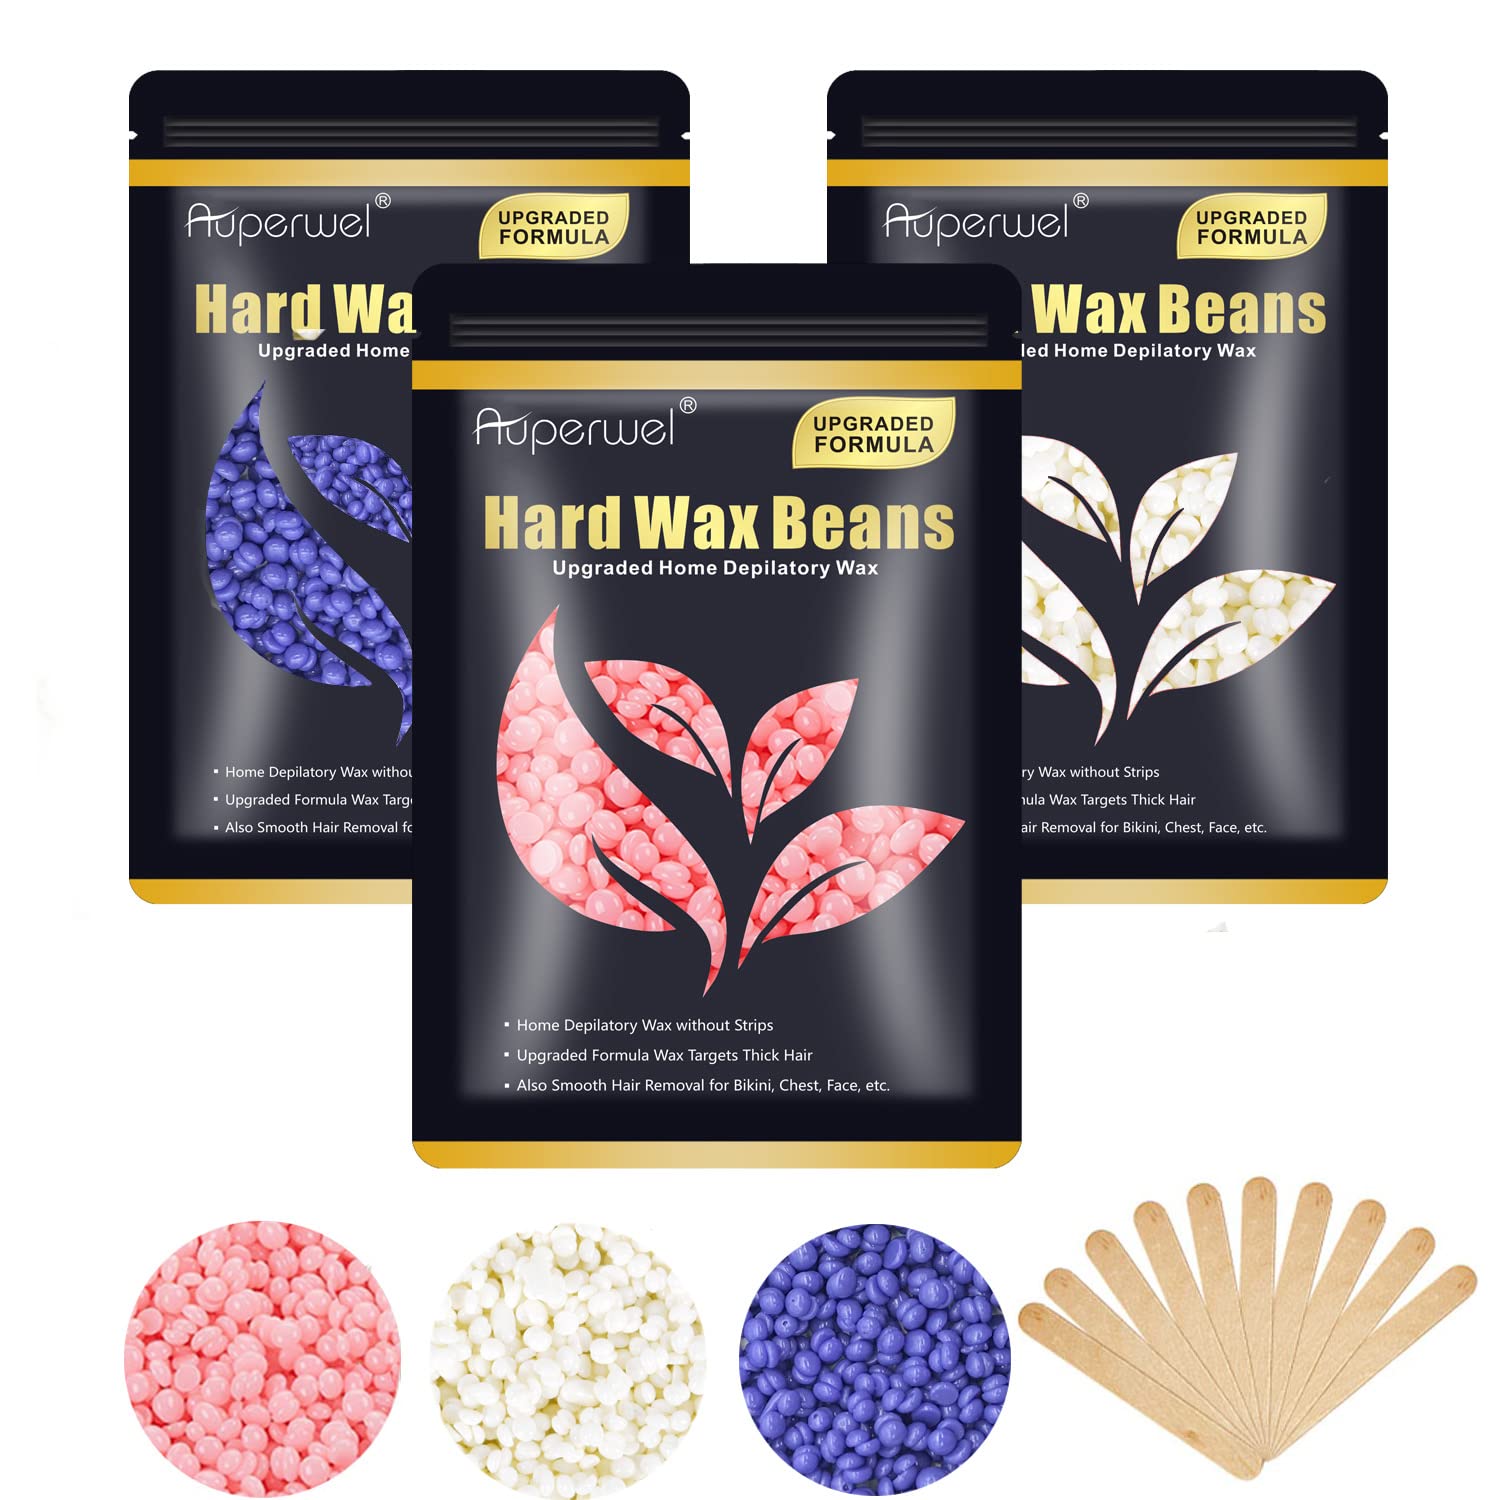 Hard Wax Beads for Hair Removal (300g/10.5oz) Painless Wax Beads - Full Body  Brazilian Bikini Wax Beads with 10pcs Applicators, At Home Waxing Beads for  Face, Eyebrow, Legs, Underarms, Back, Chest, Perfect